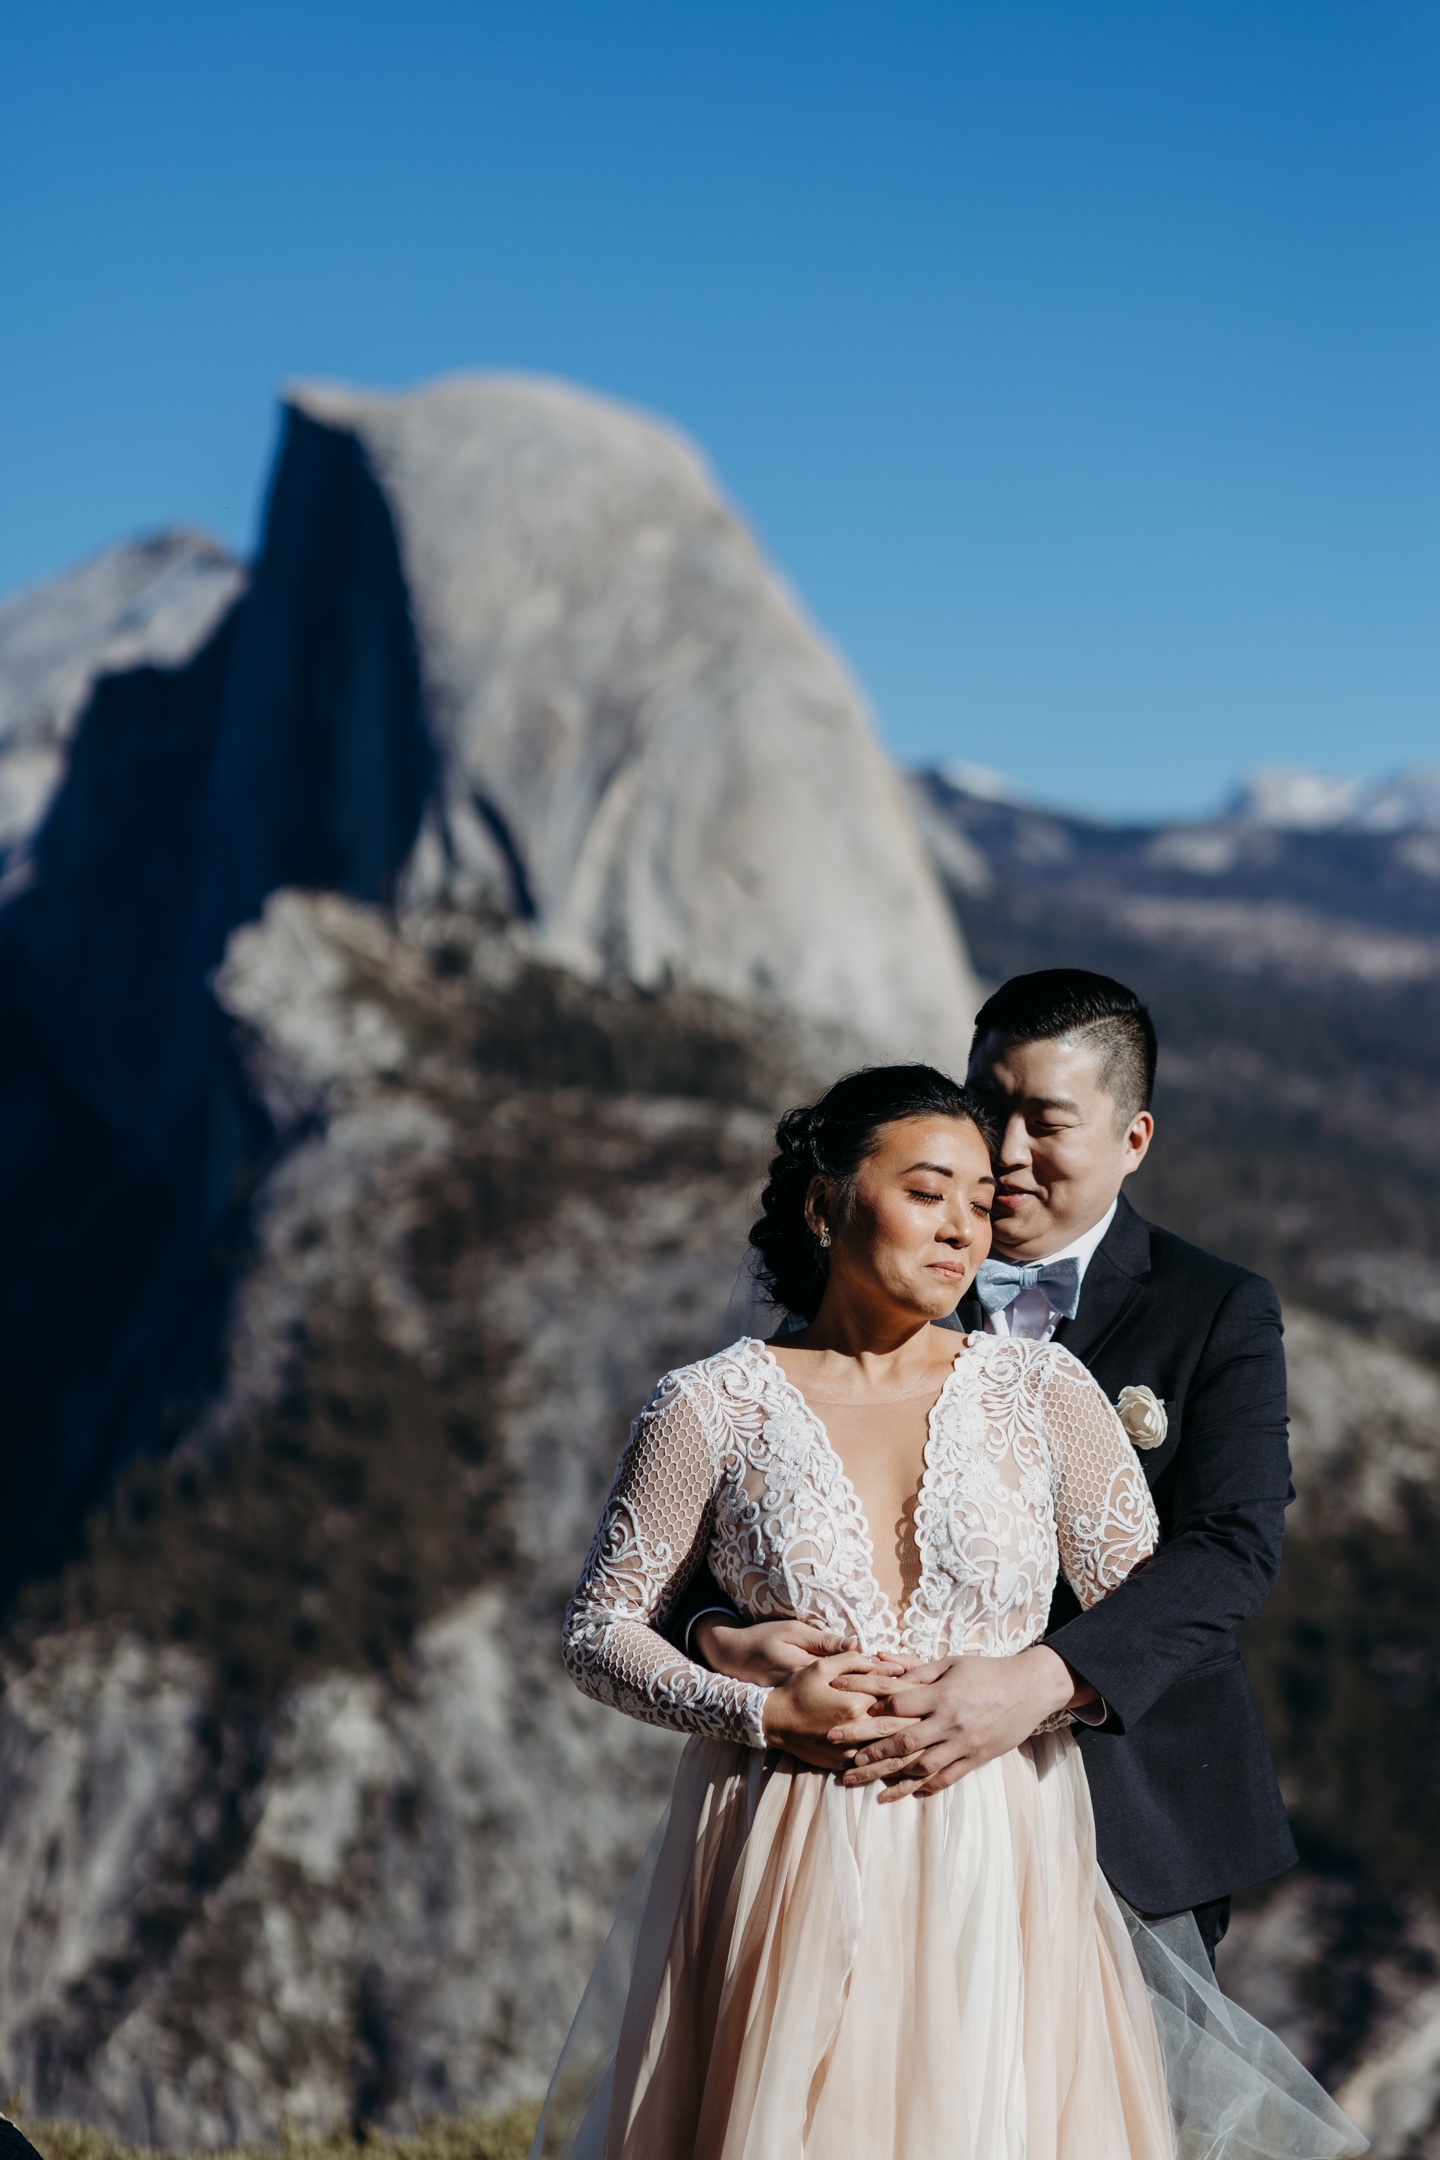 Groom embraces his bride from behind with Yosemite's Half Dome in the background.